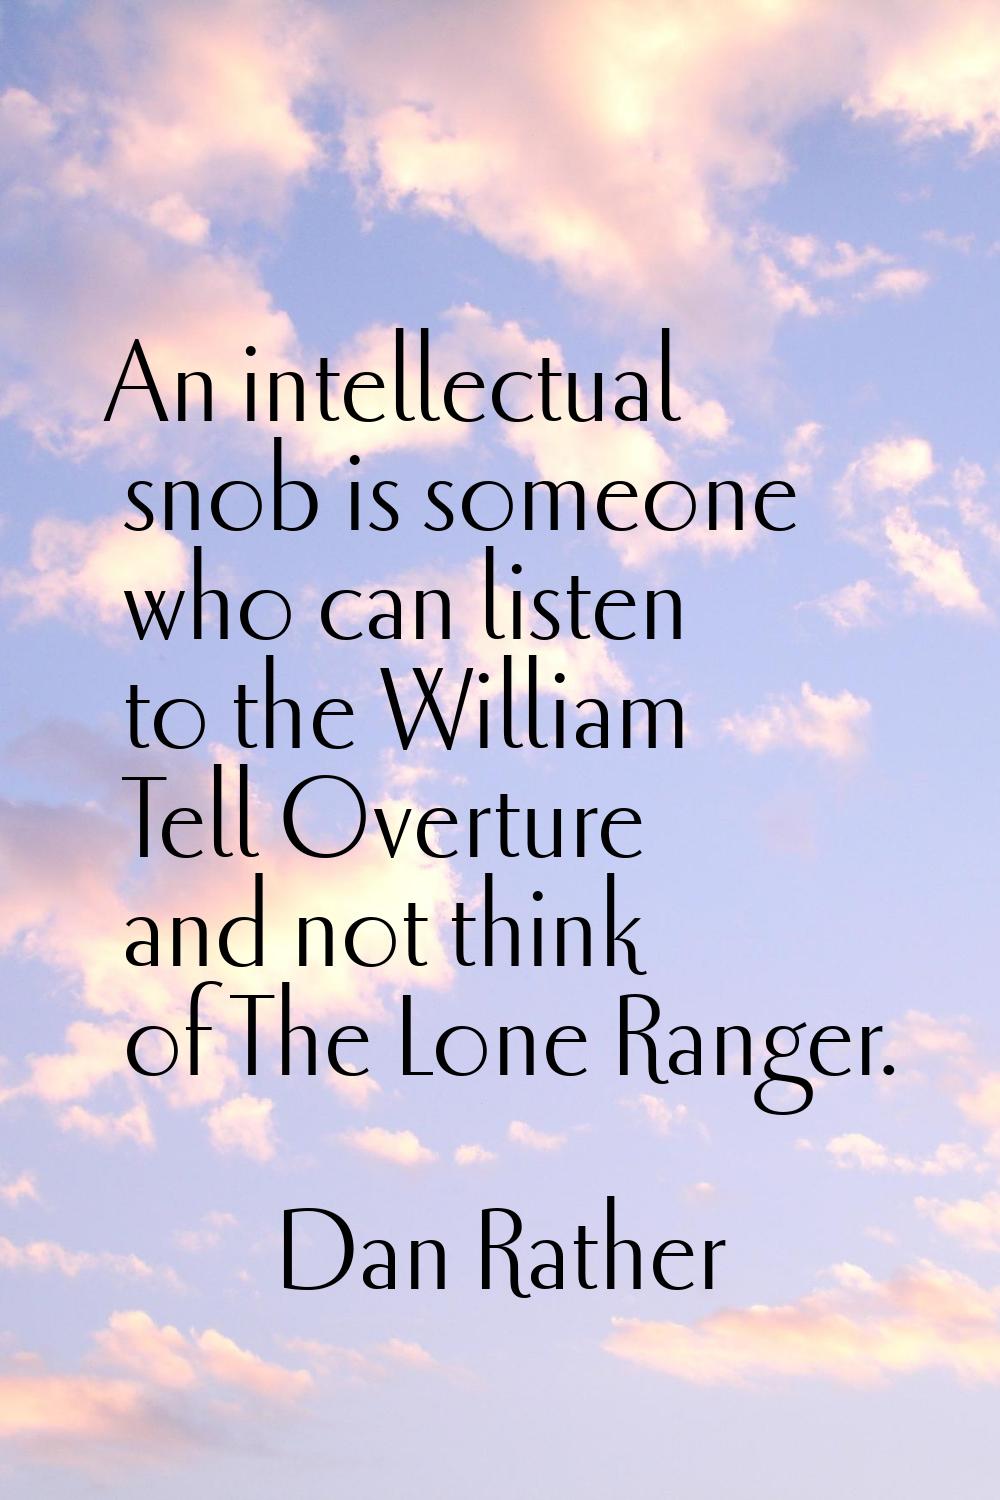 An intellectual snob is someone who can listen to the William Tell Overture and not think of The Lo